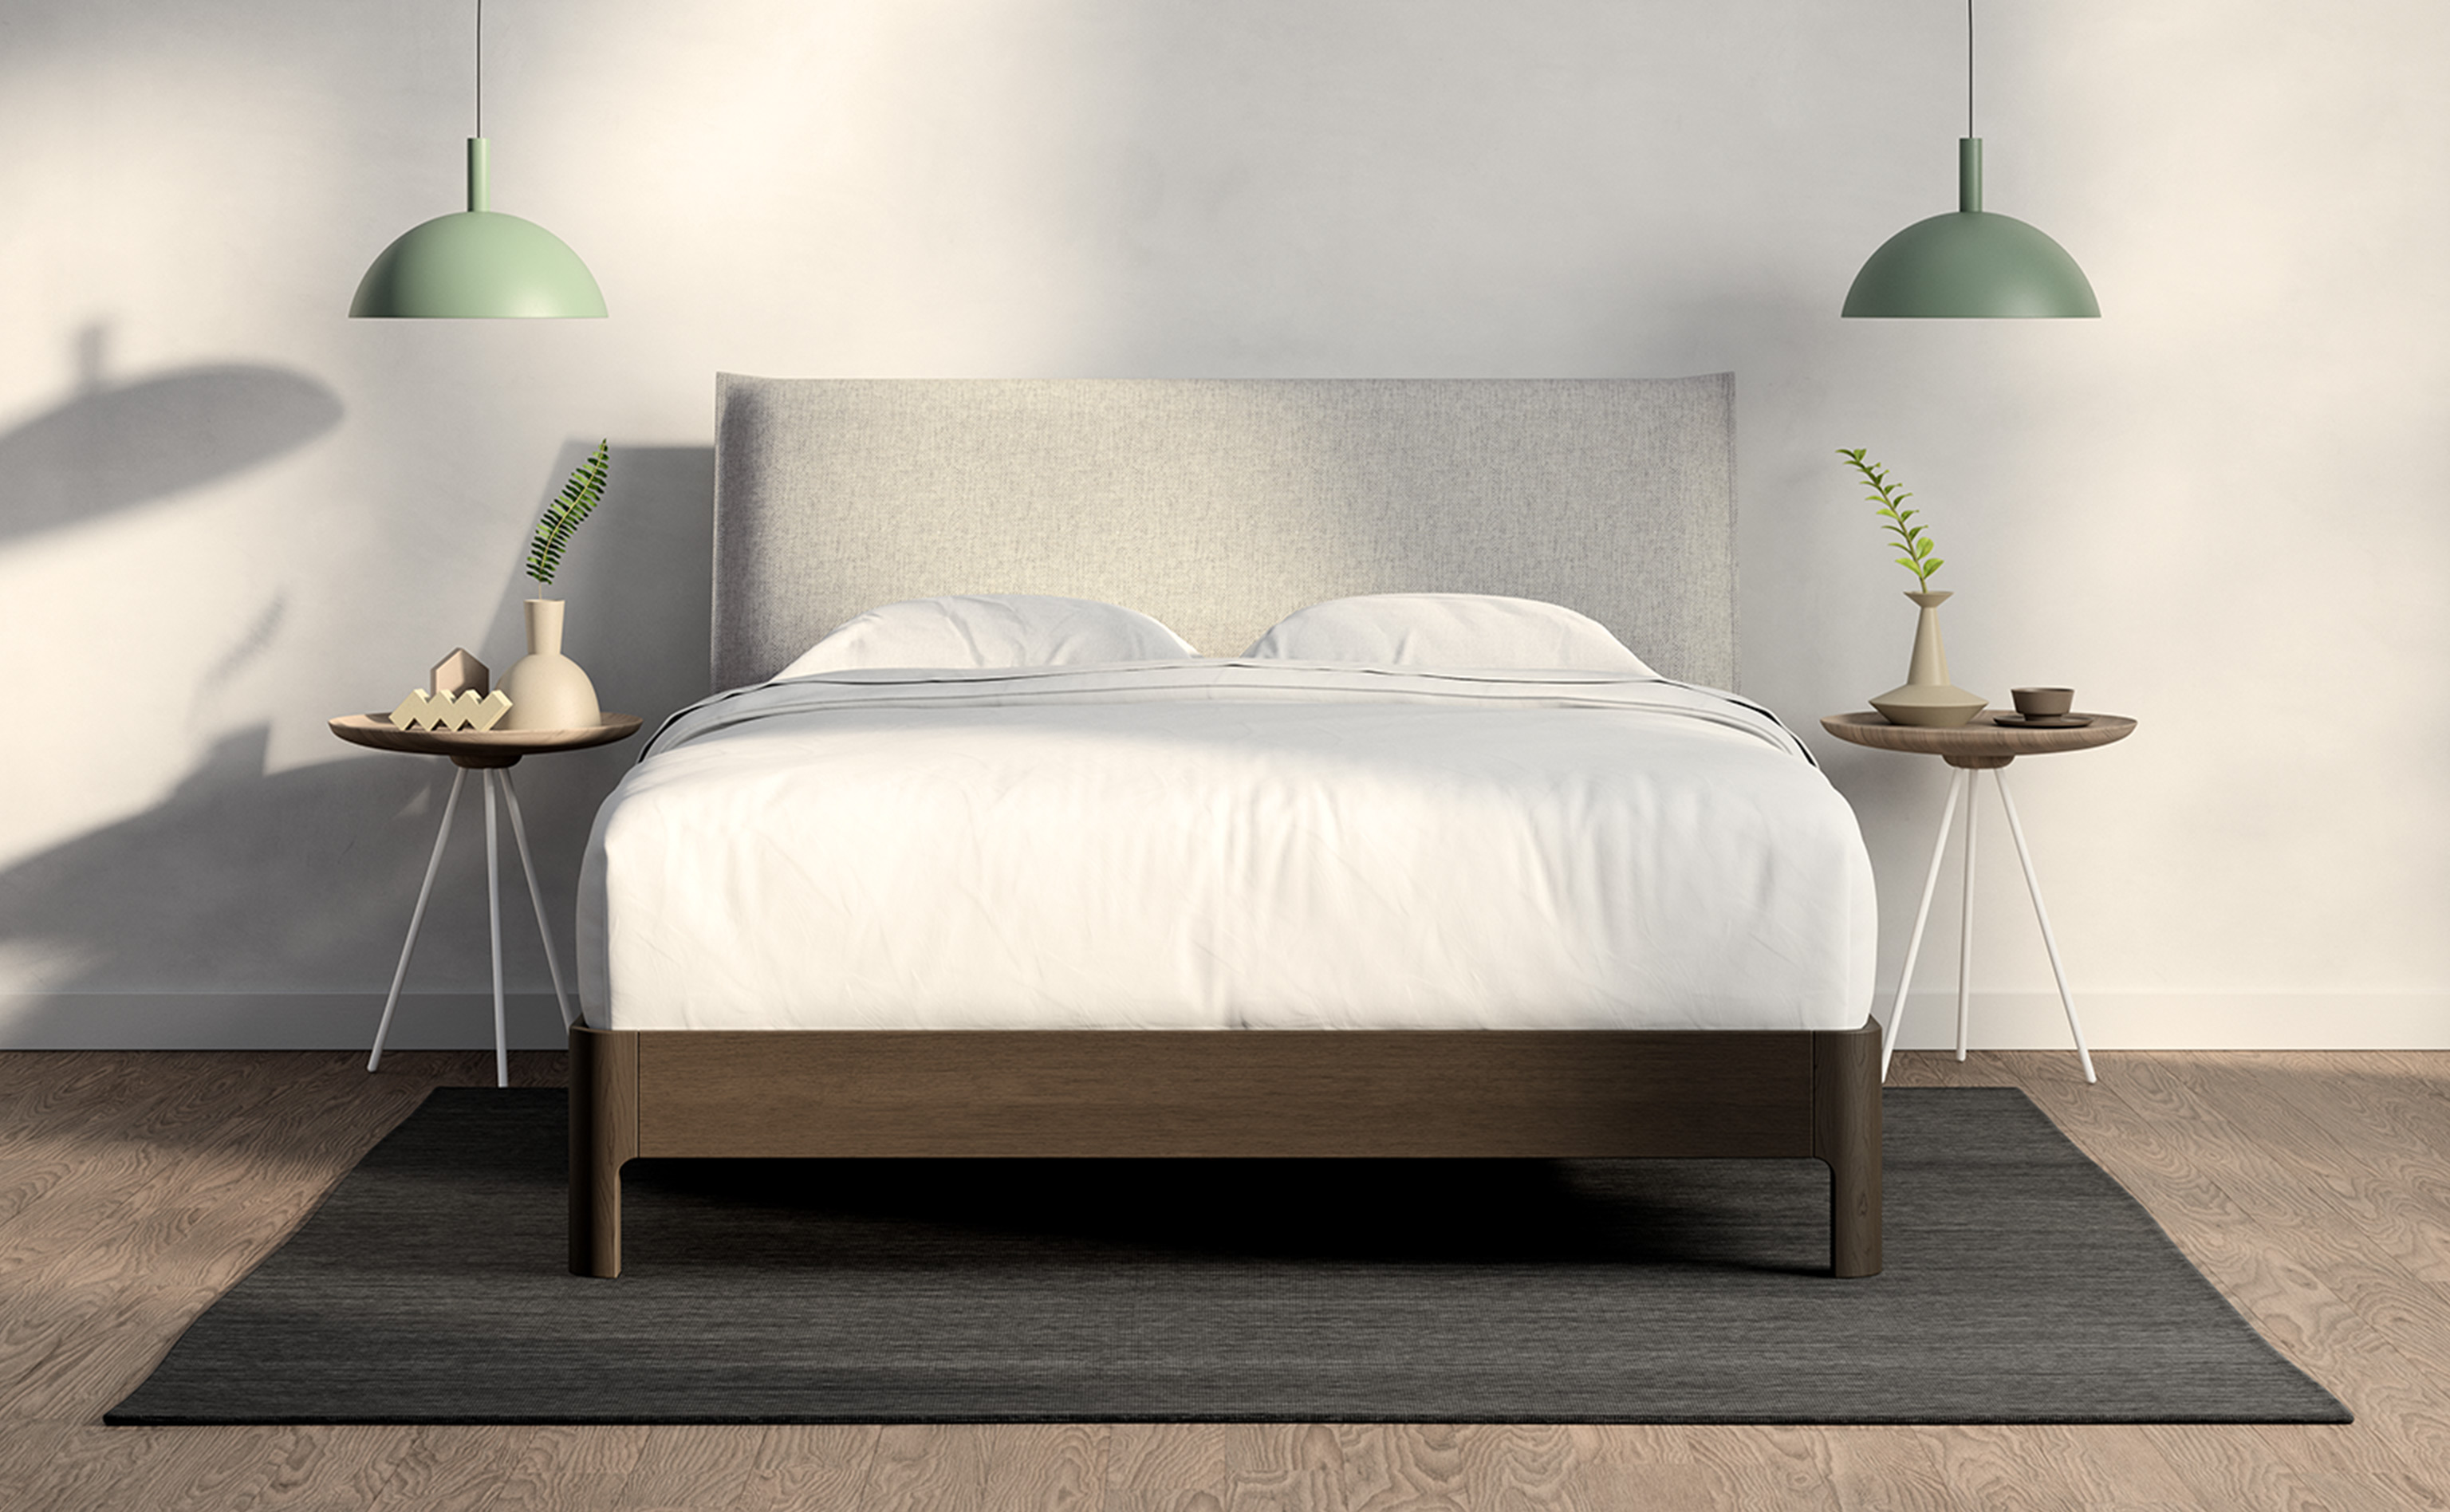 Casper Repose Wooden Bed Frame With, Wood Bed Frame With Headboard